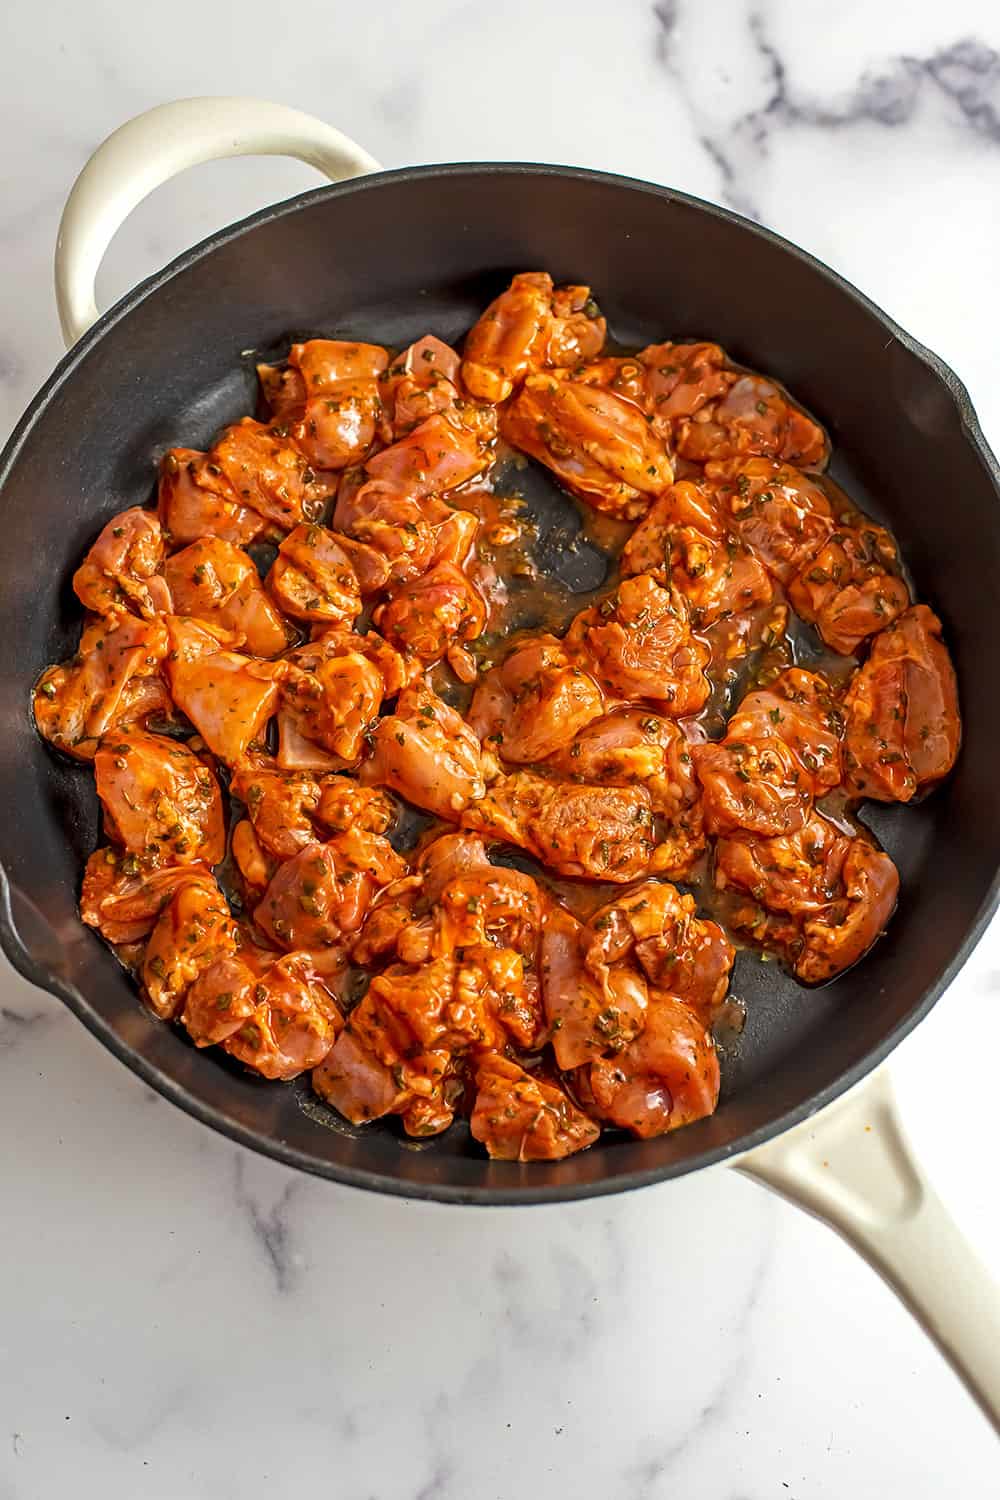 Buffalo sauce over raw chicken bites in cast iron skillet.